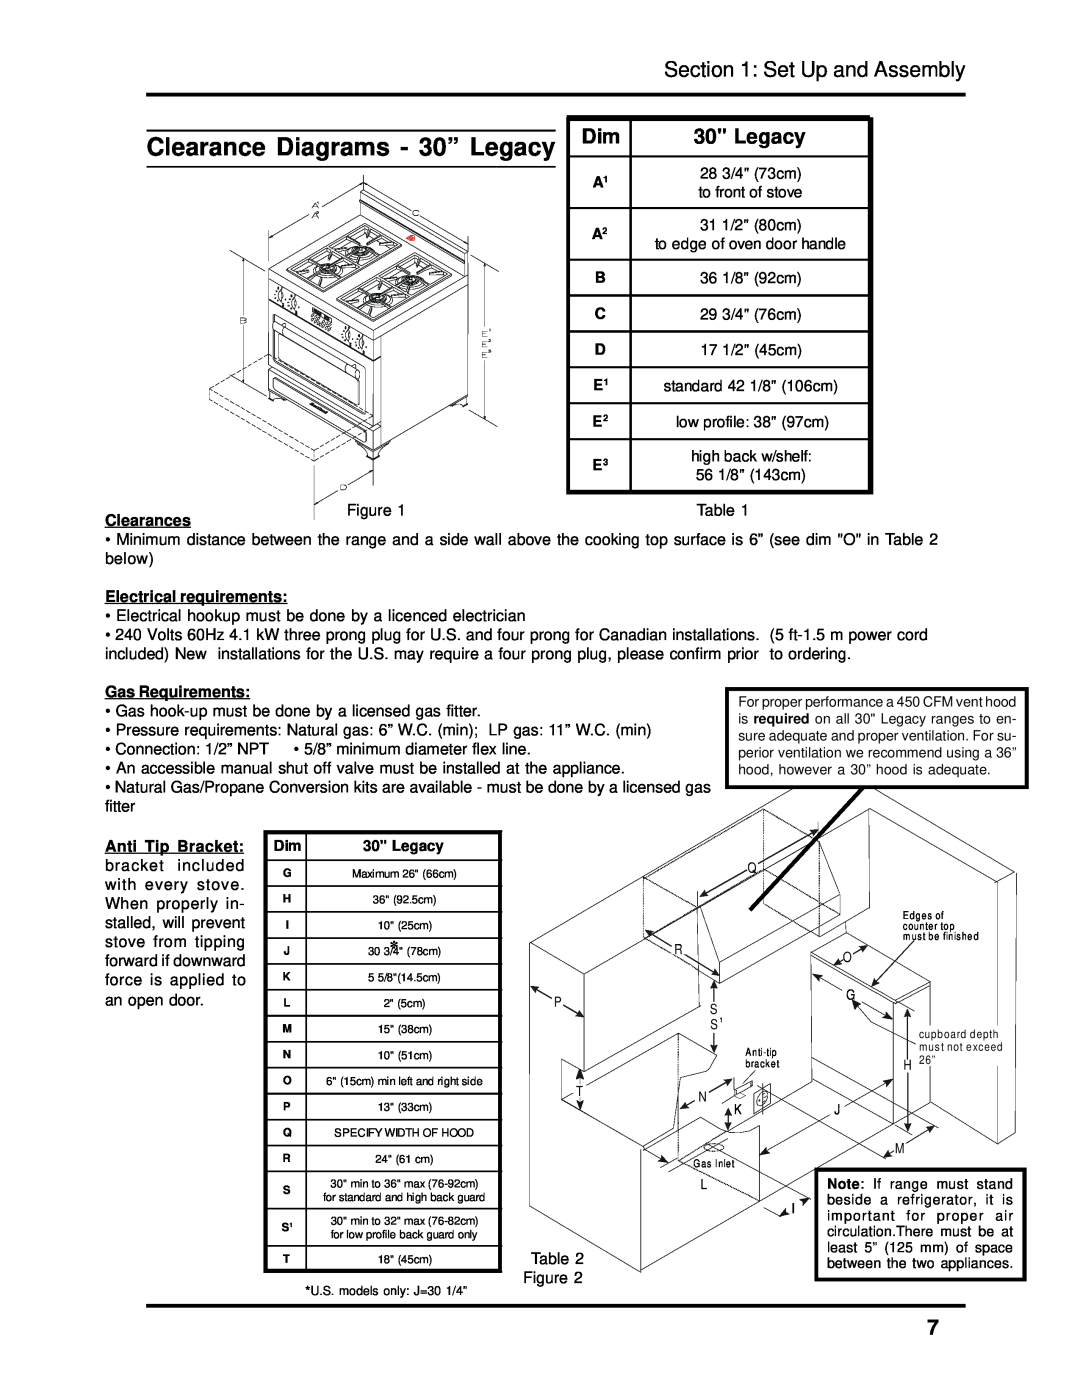 Heartland 3630 Clearance Diagrams - 30” Legacy, Set Up and Assembly, Clearances, Electrical requirements, Gas Requirements 